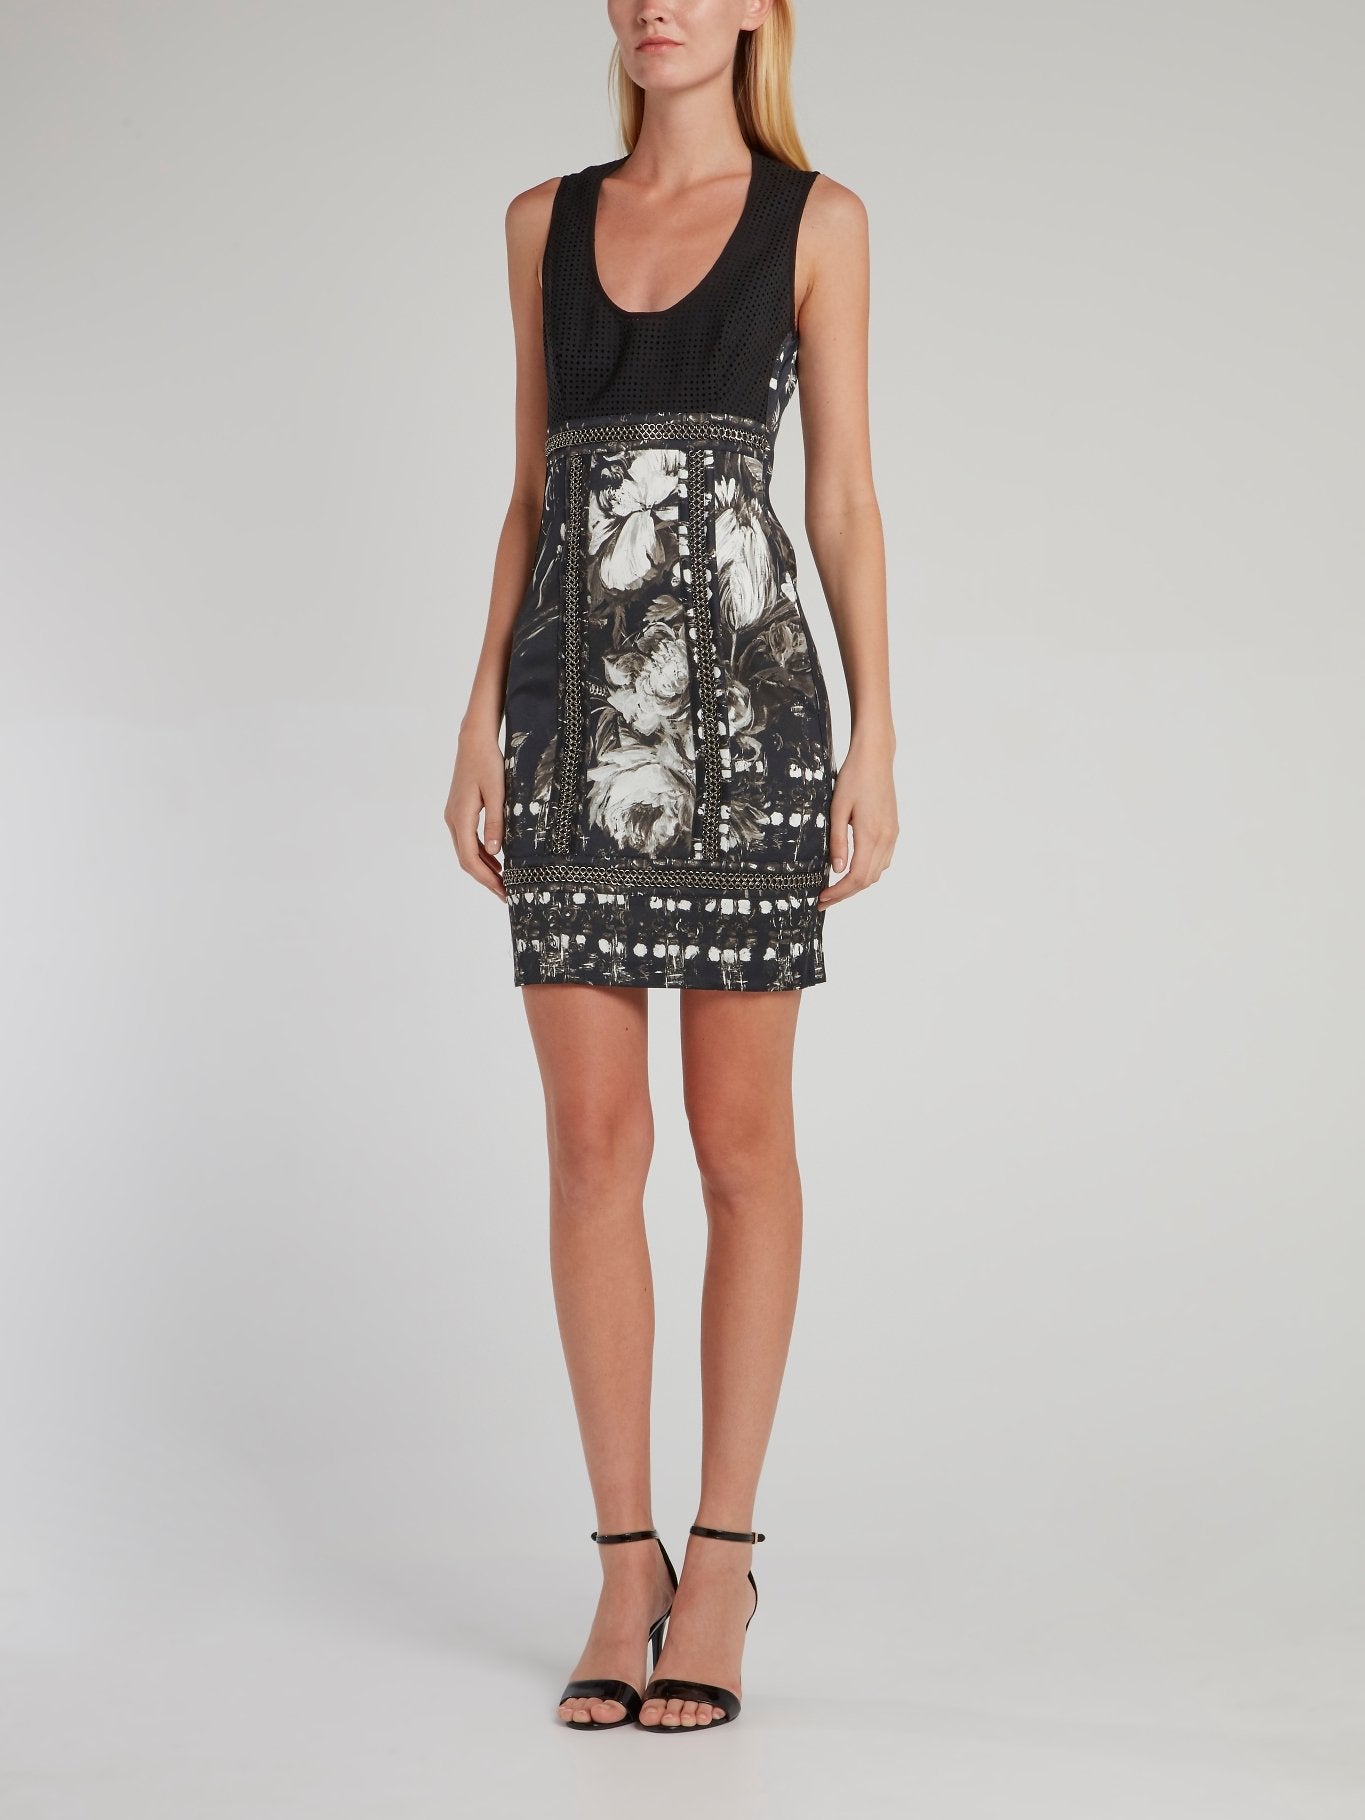 Black Perforated Bodice Floral Dress